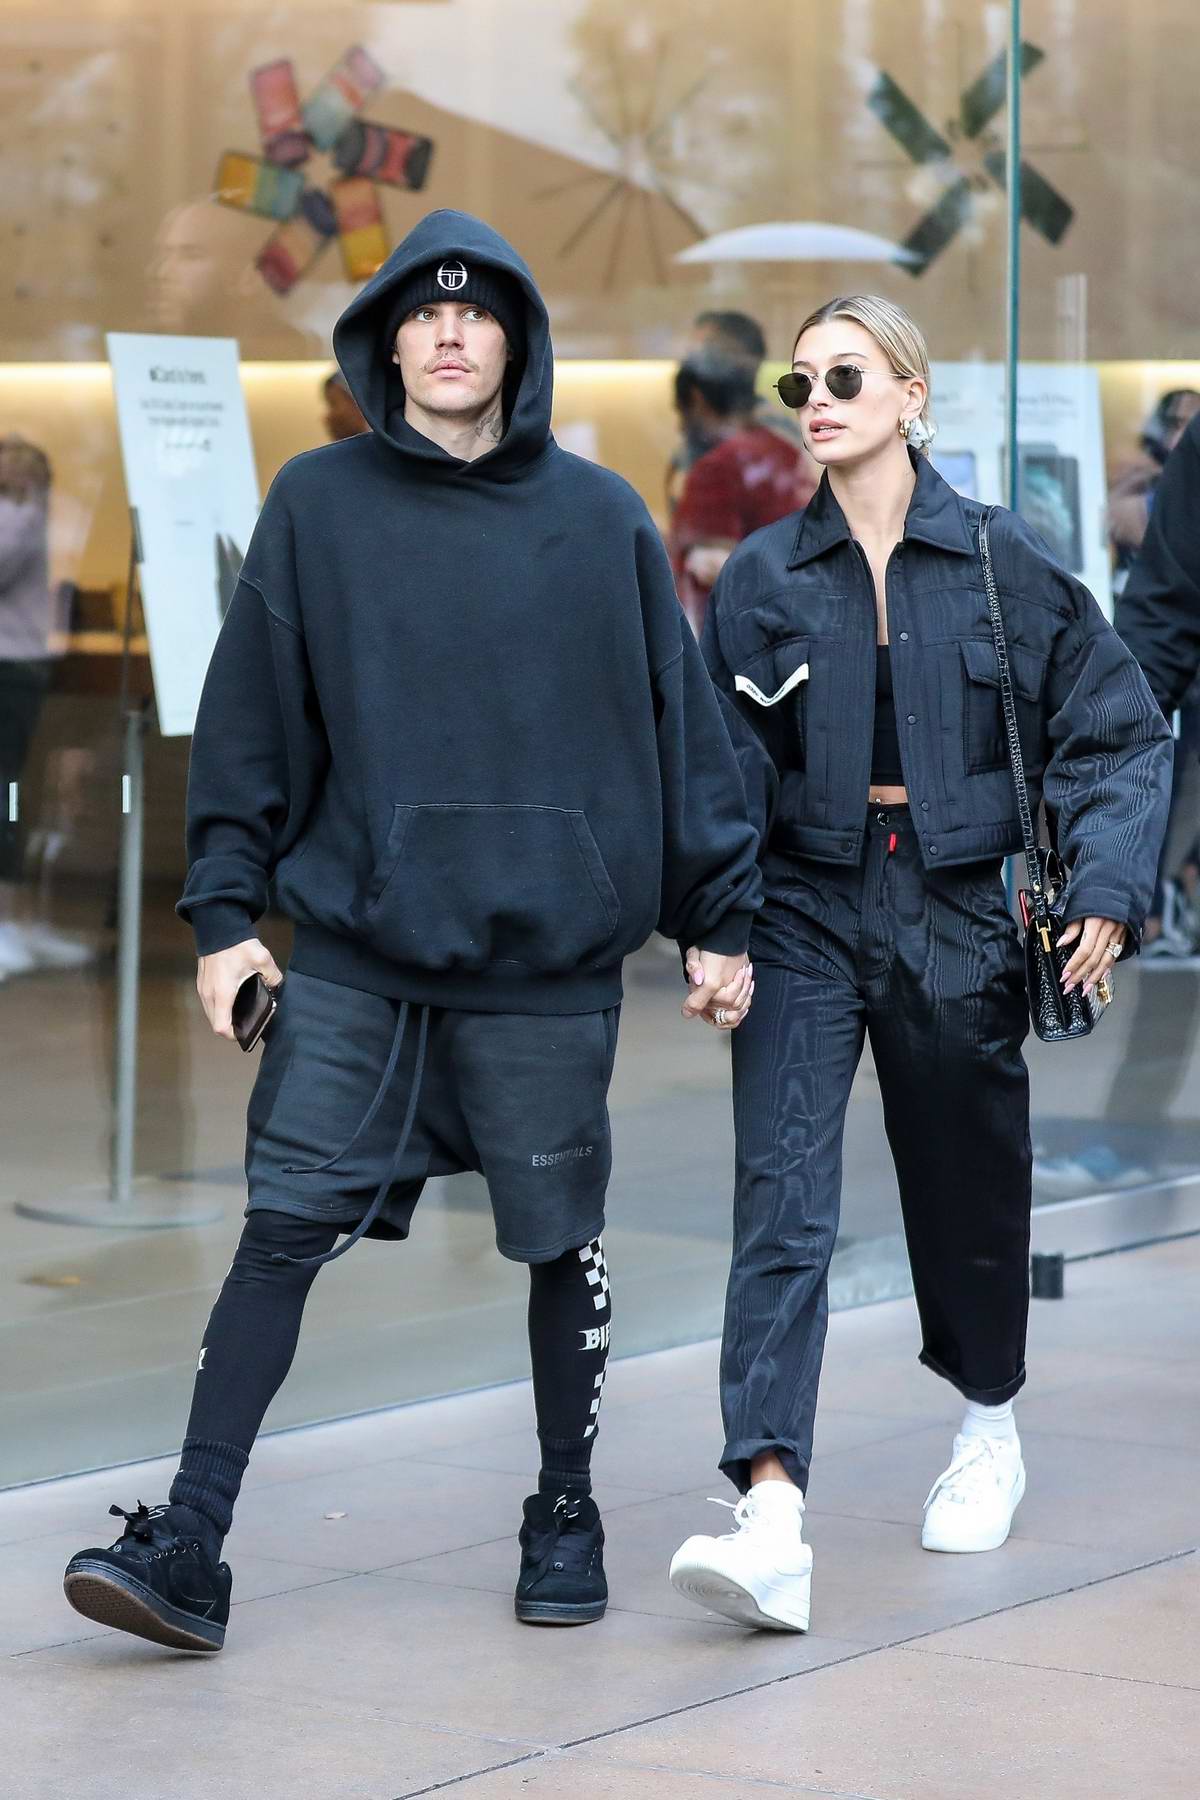 Hailey Bieber And Justin Bieber Sport Matching Outfits While Out For Some Shopping At The Grove